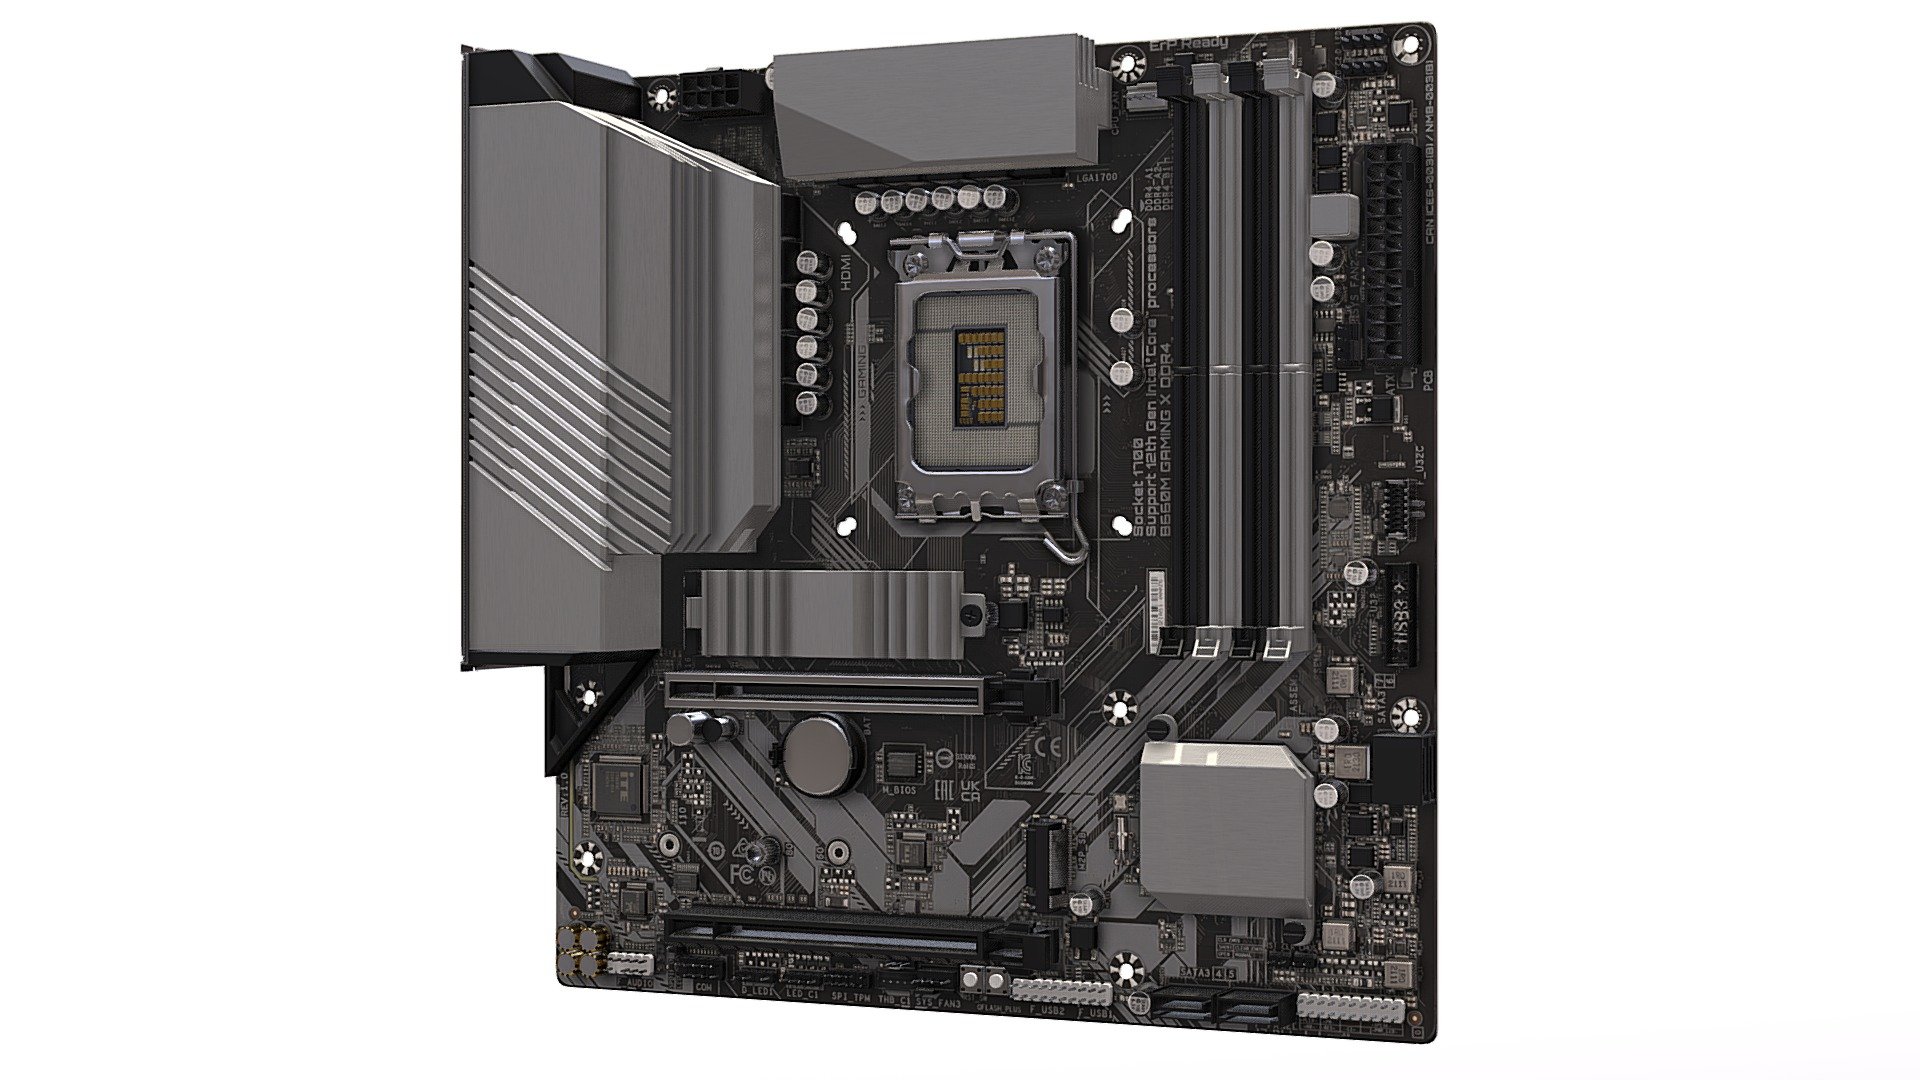 High-detailed 3d model of Generic motherboard mATX

Ready to use in any software

For questions about 3d models write here: andreyfedyushov@gmail.com - Motherboard mATX - 3D model by digitalrazor3d 3d model